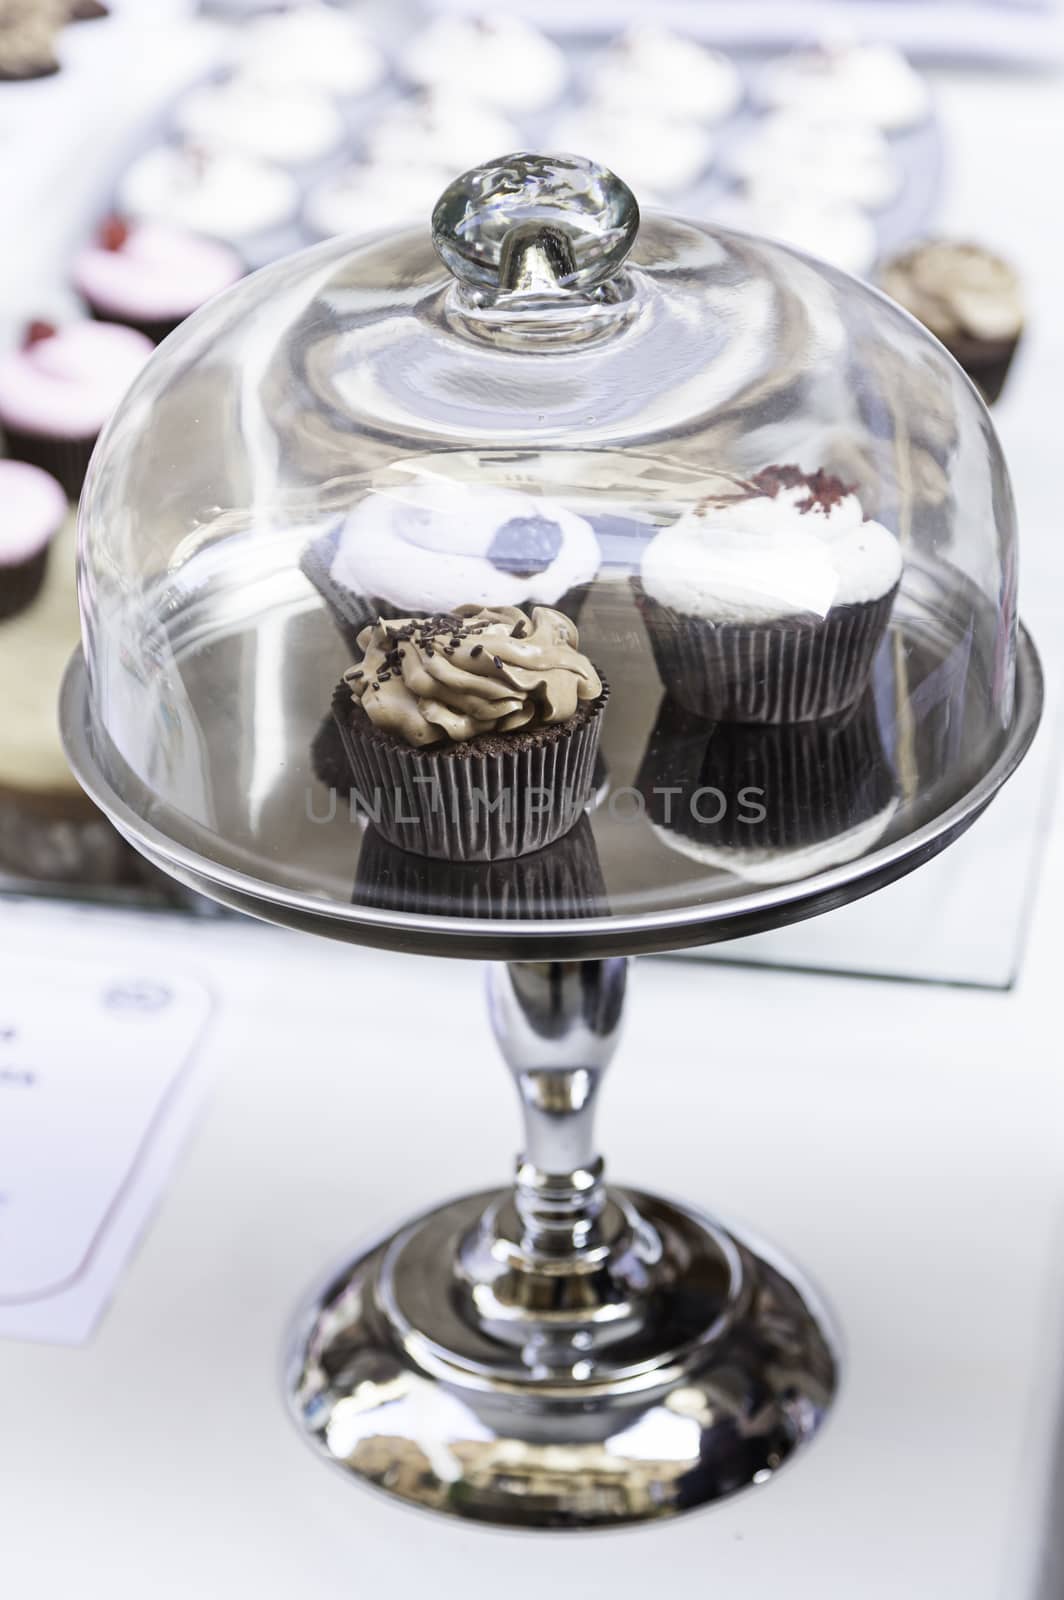 Homemade cupcakes in a glass case, detail of a sweet dessert in a market